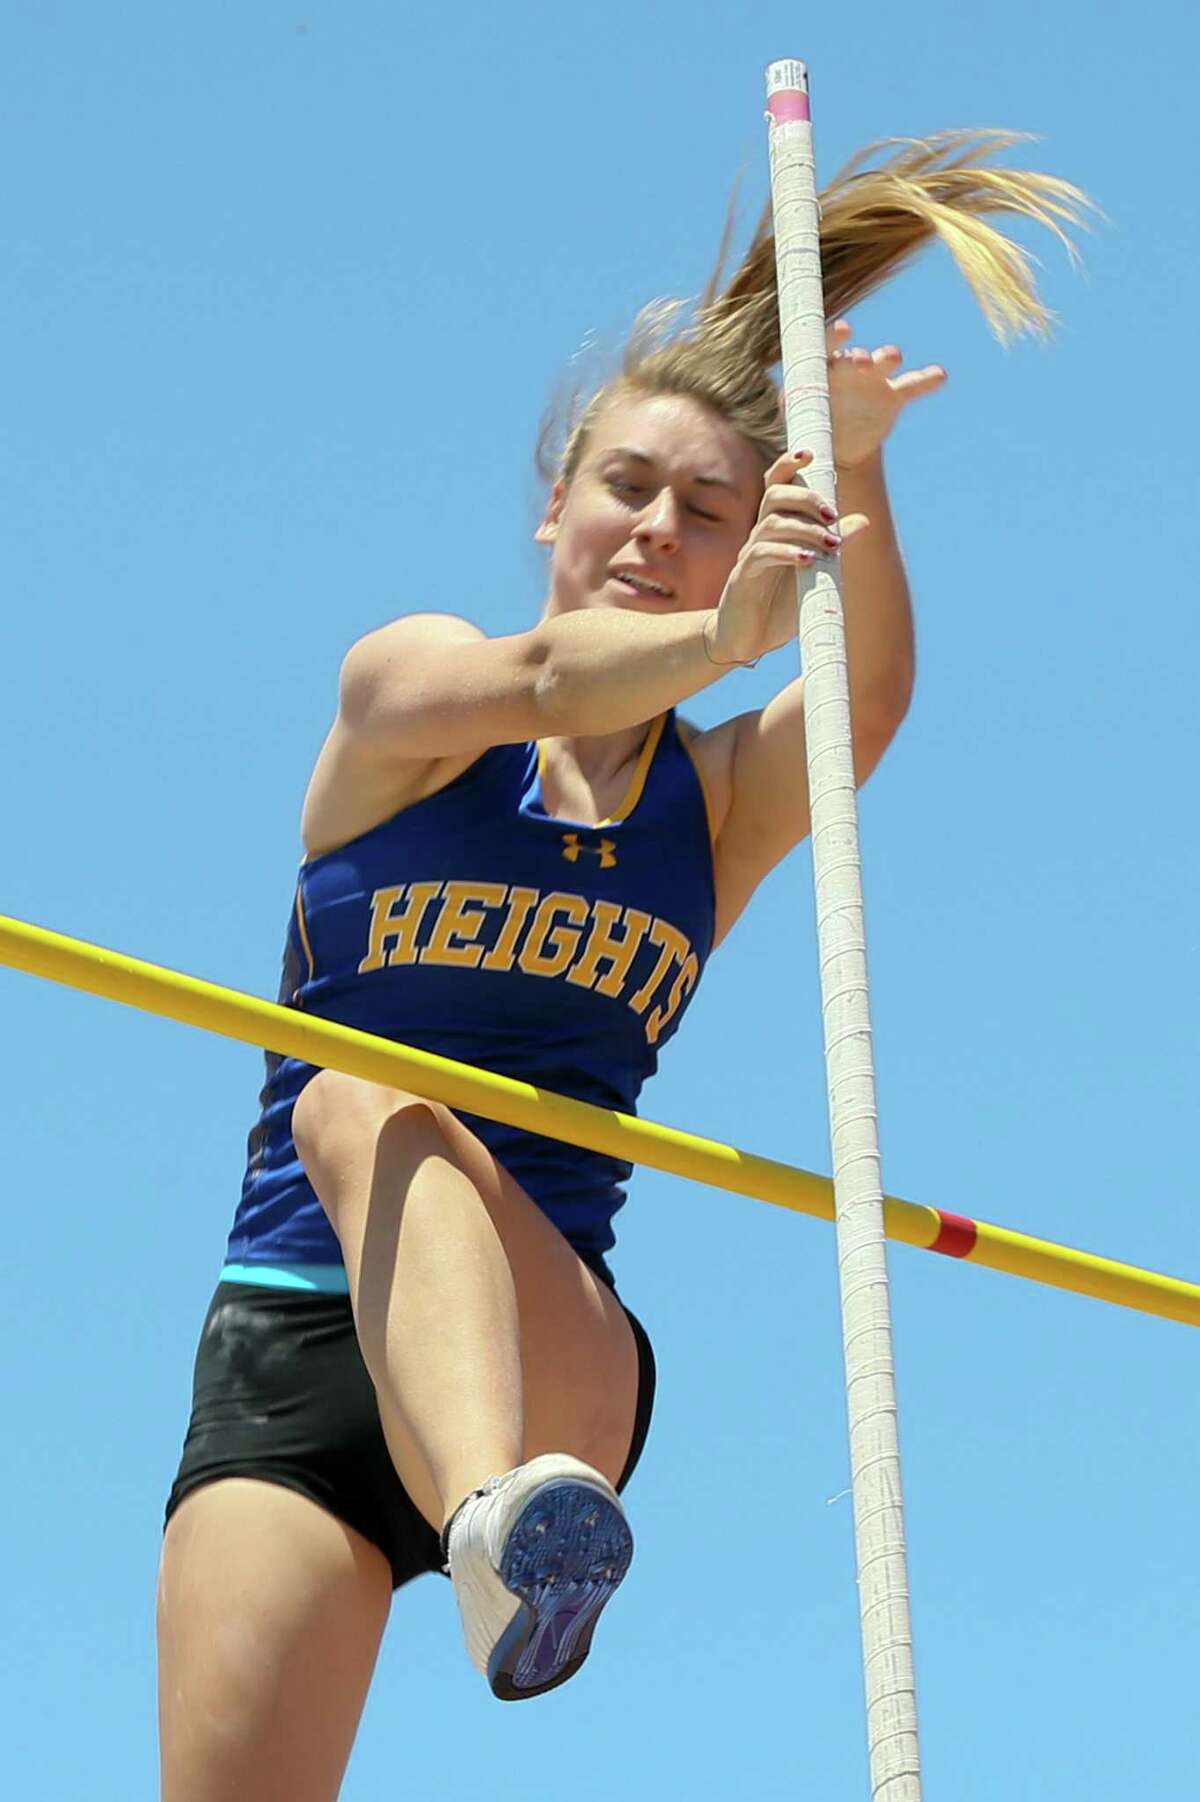 Alamo Heights' Alina Borawski attempts to clear the bar at 11" 0" during the first day of the Region IV-5A track and field meet at Heroes Stadium on Friday, April 26, 2019. Borawski finished second in the event with a vault of 10'9".